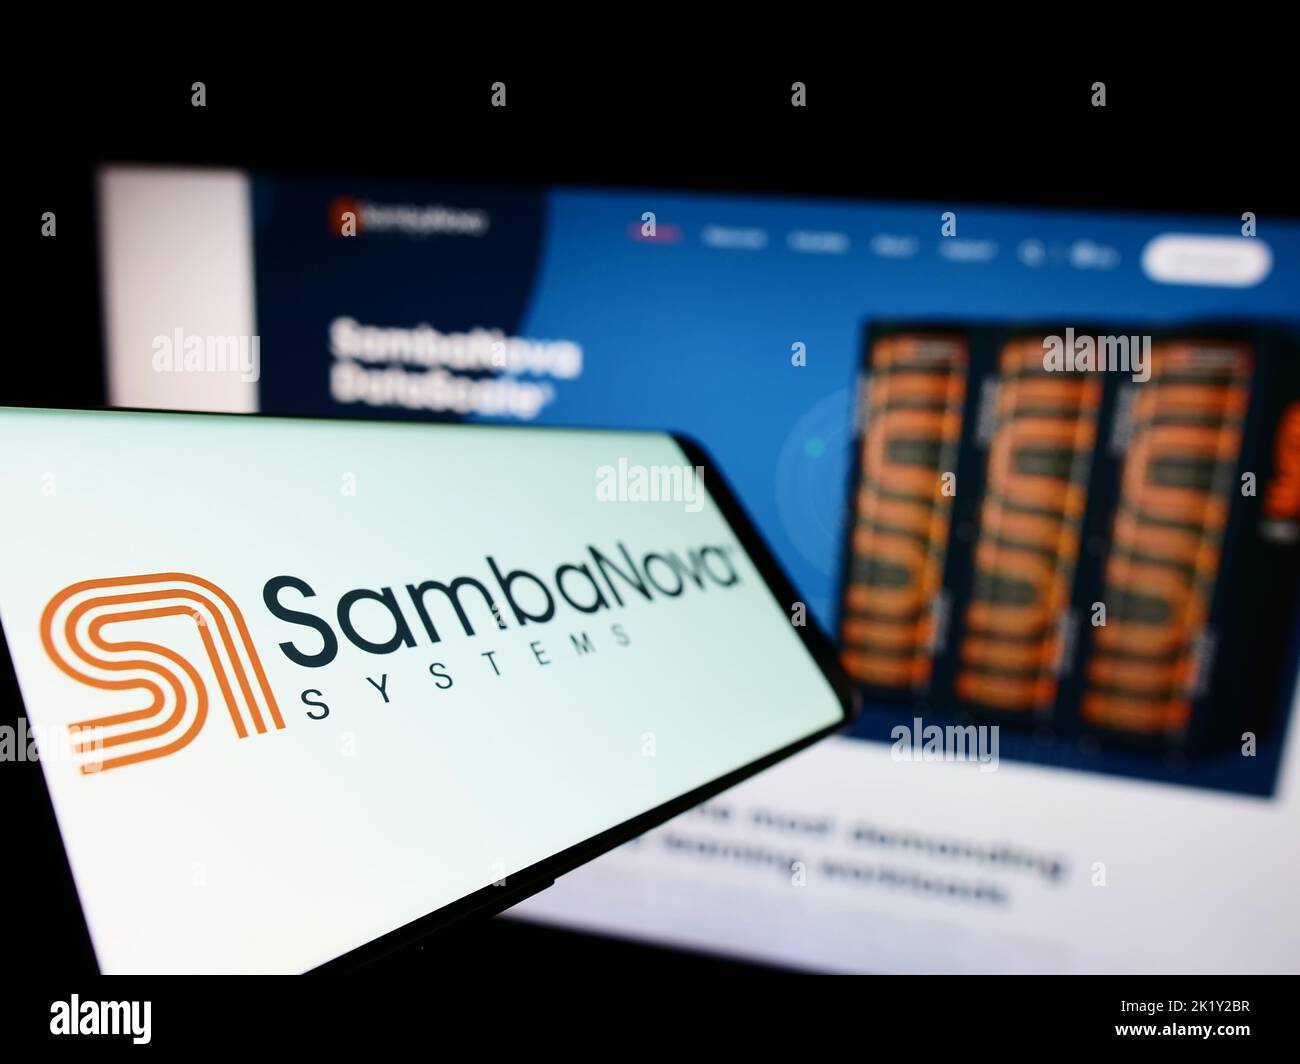 Mobile phone with logo of American AI company SambaNova Systems Inc. on screen in front of business website. Focus on left of phone display. Stock Photo